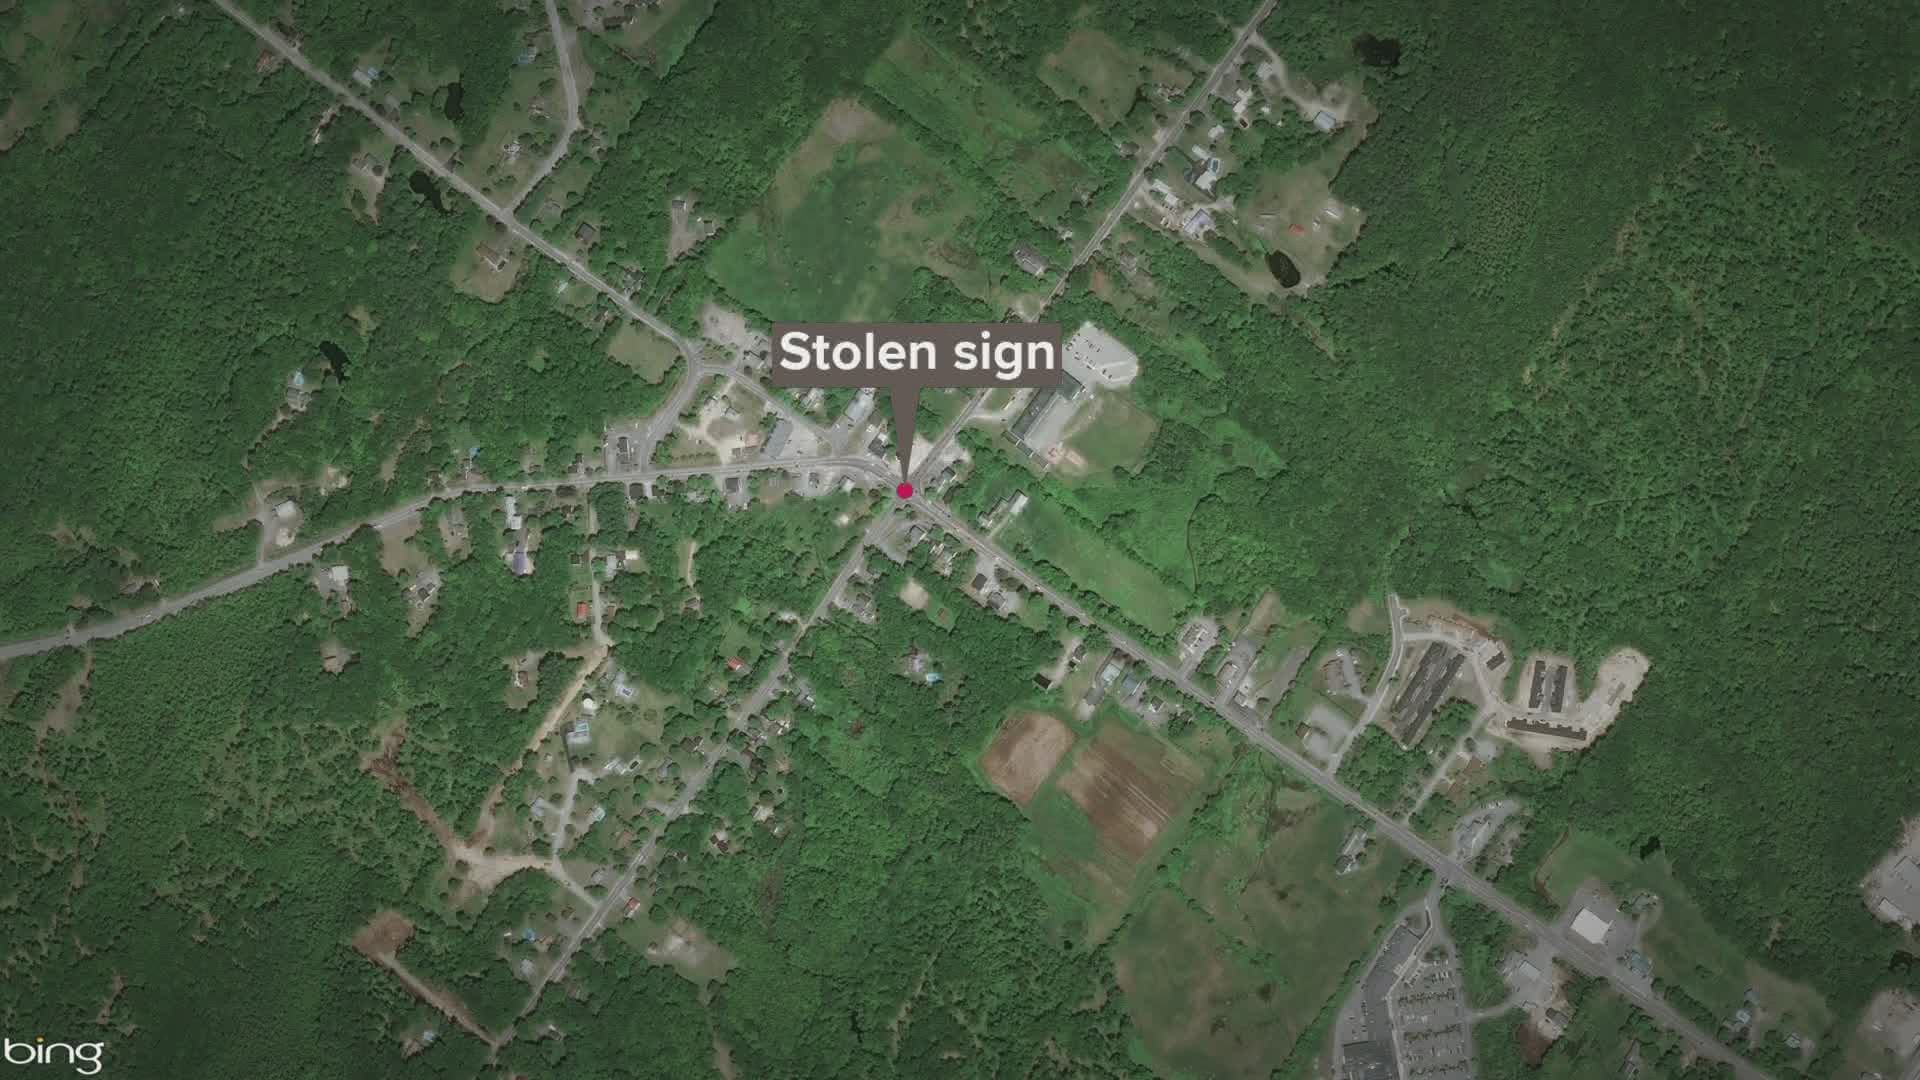 Cumberland County Sheriff's Ofice received several complaints about stolen political signs at the intersection of Route 35 and 25 in Standish.